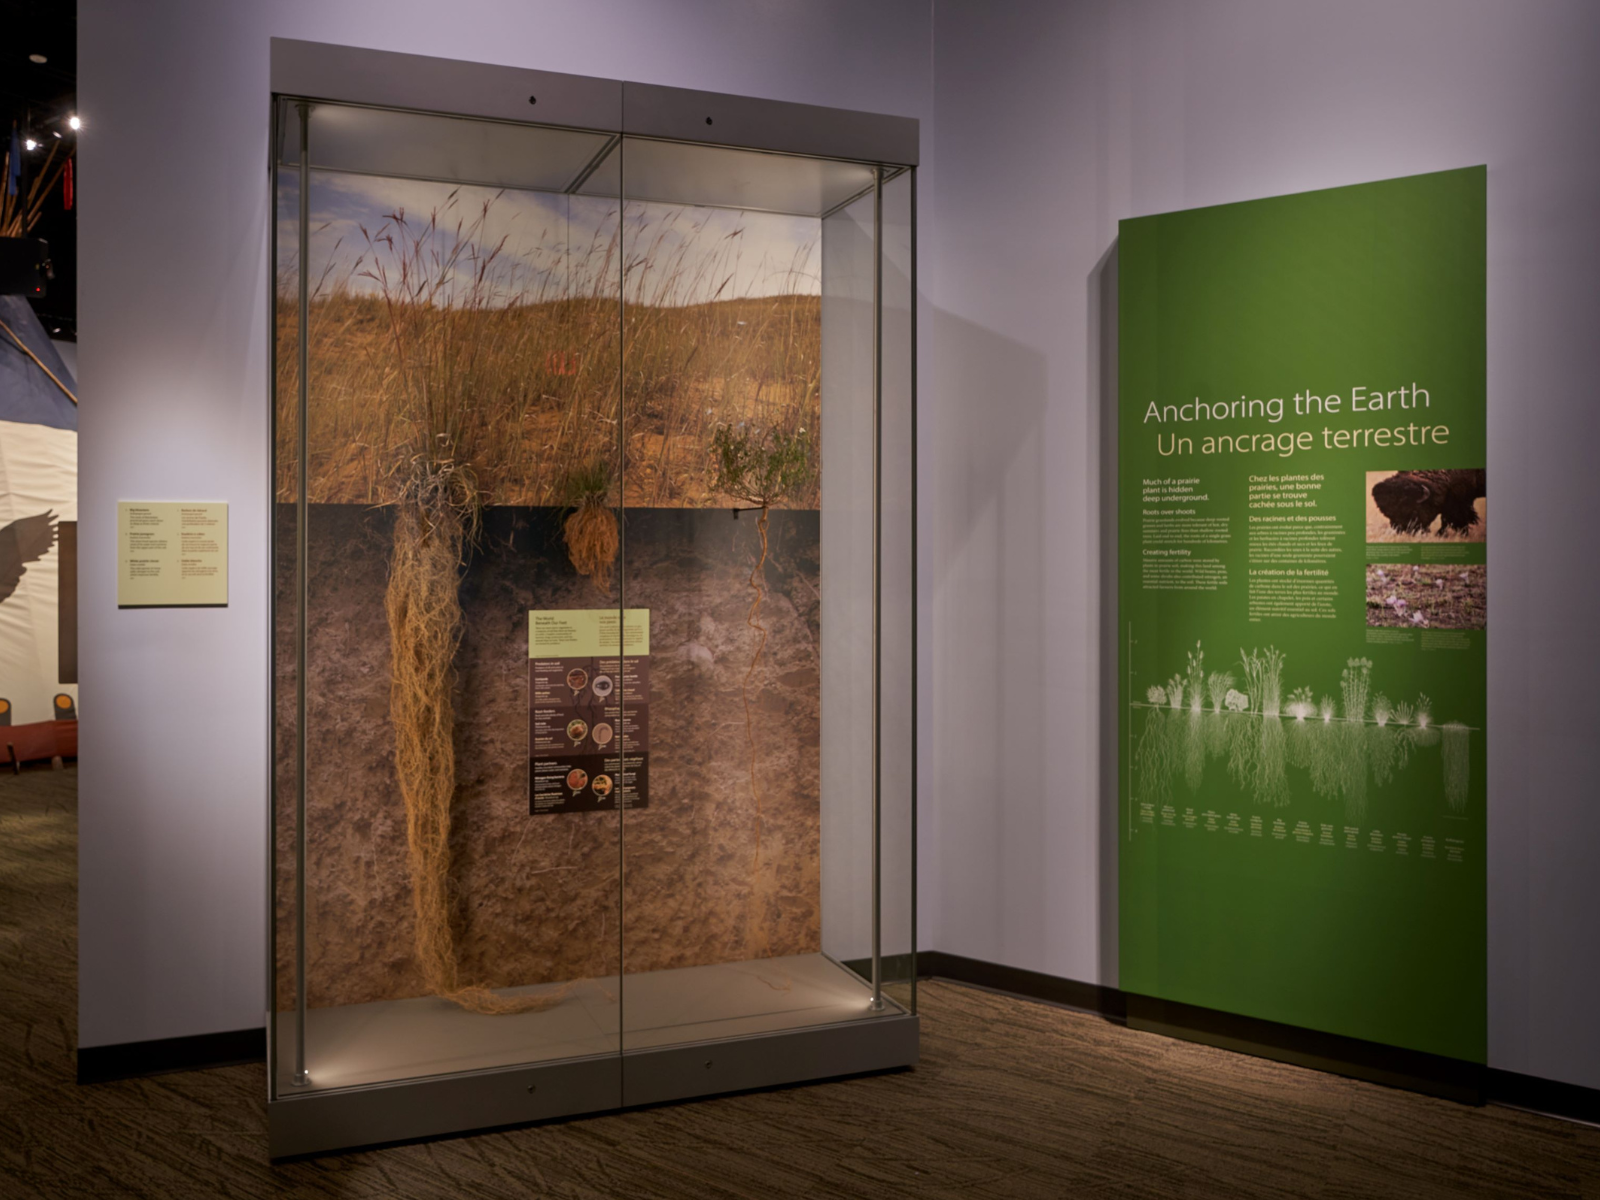 A display case containing three grass specimens with intact root systems of varying lengths next to a green text panel titled "Anchoring the Earth".